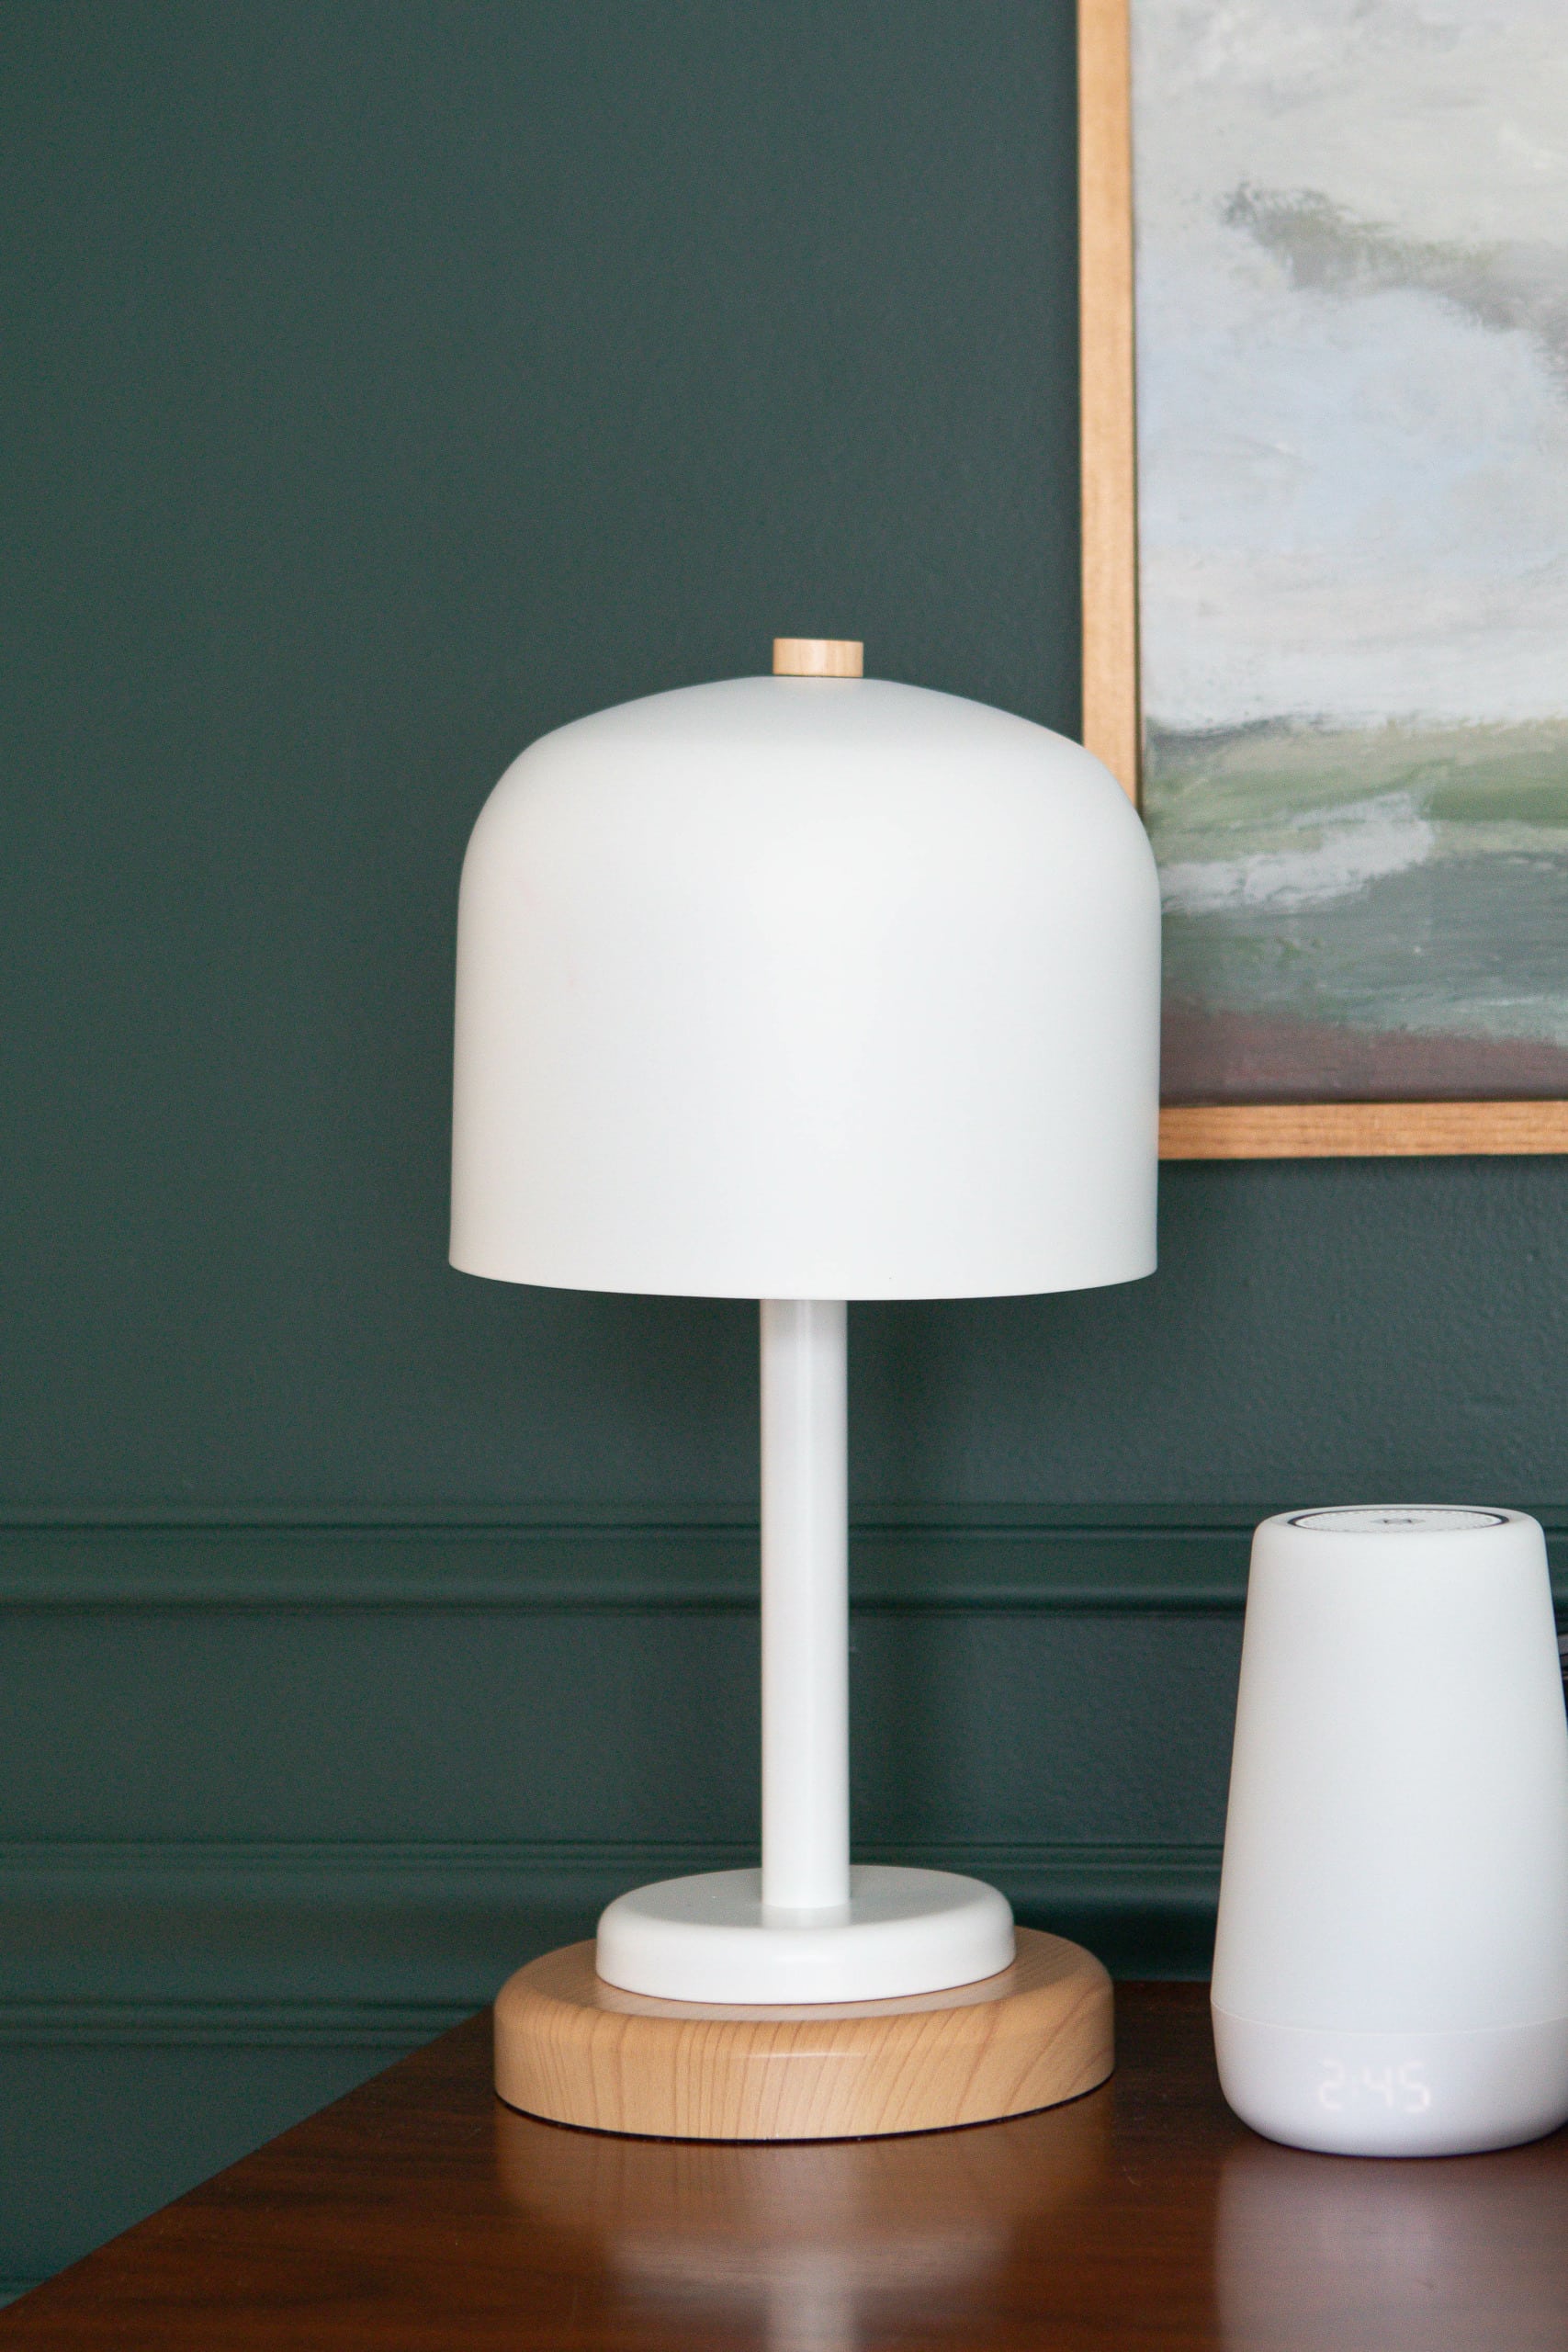 Opt for a touch lamp near your changing table